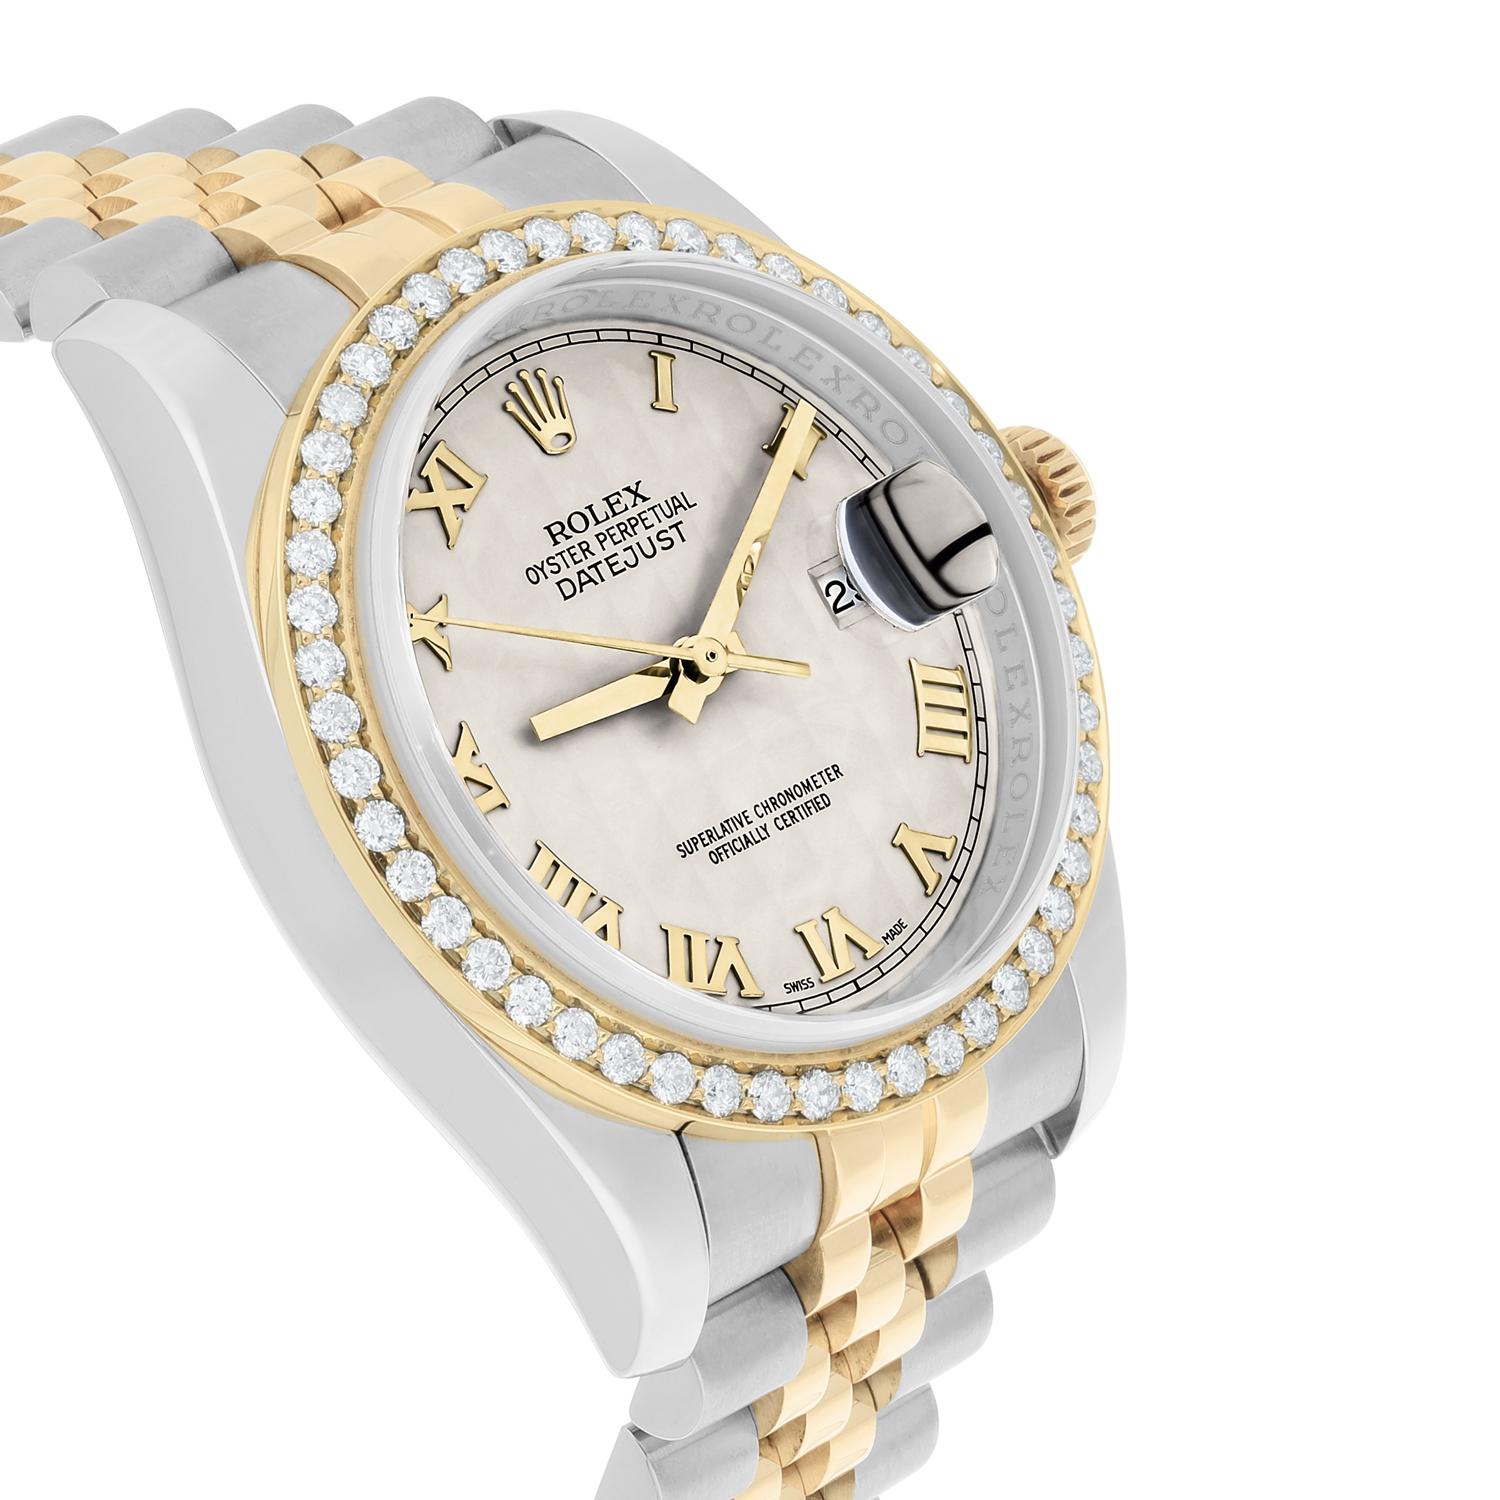 Rolex Datejust 36 Diamond Gold and Steel 116233 Ivory Pyramid Dial Jubilee Watch For Sale 1